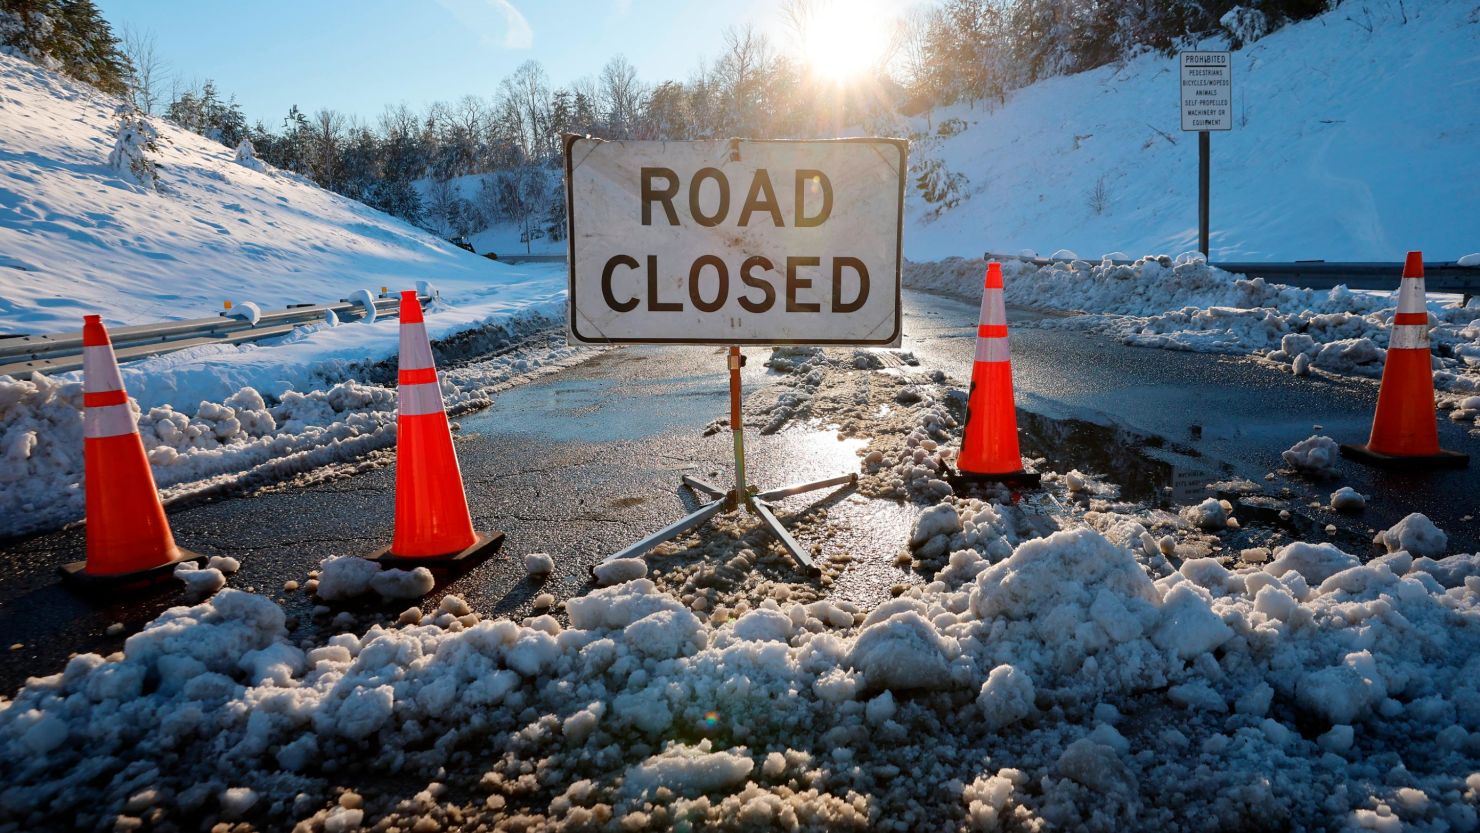 The entrance ramp to I-95 is closed after a winter storm dumped a foot of snow on the area overnight on January 4, 2022, near Fredericksburg in Stafford County, Virginia. 